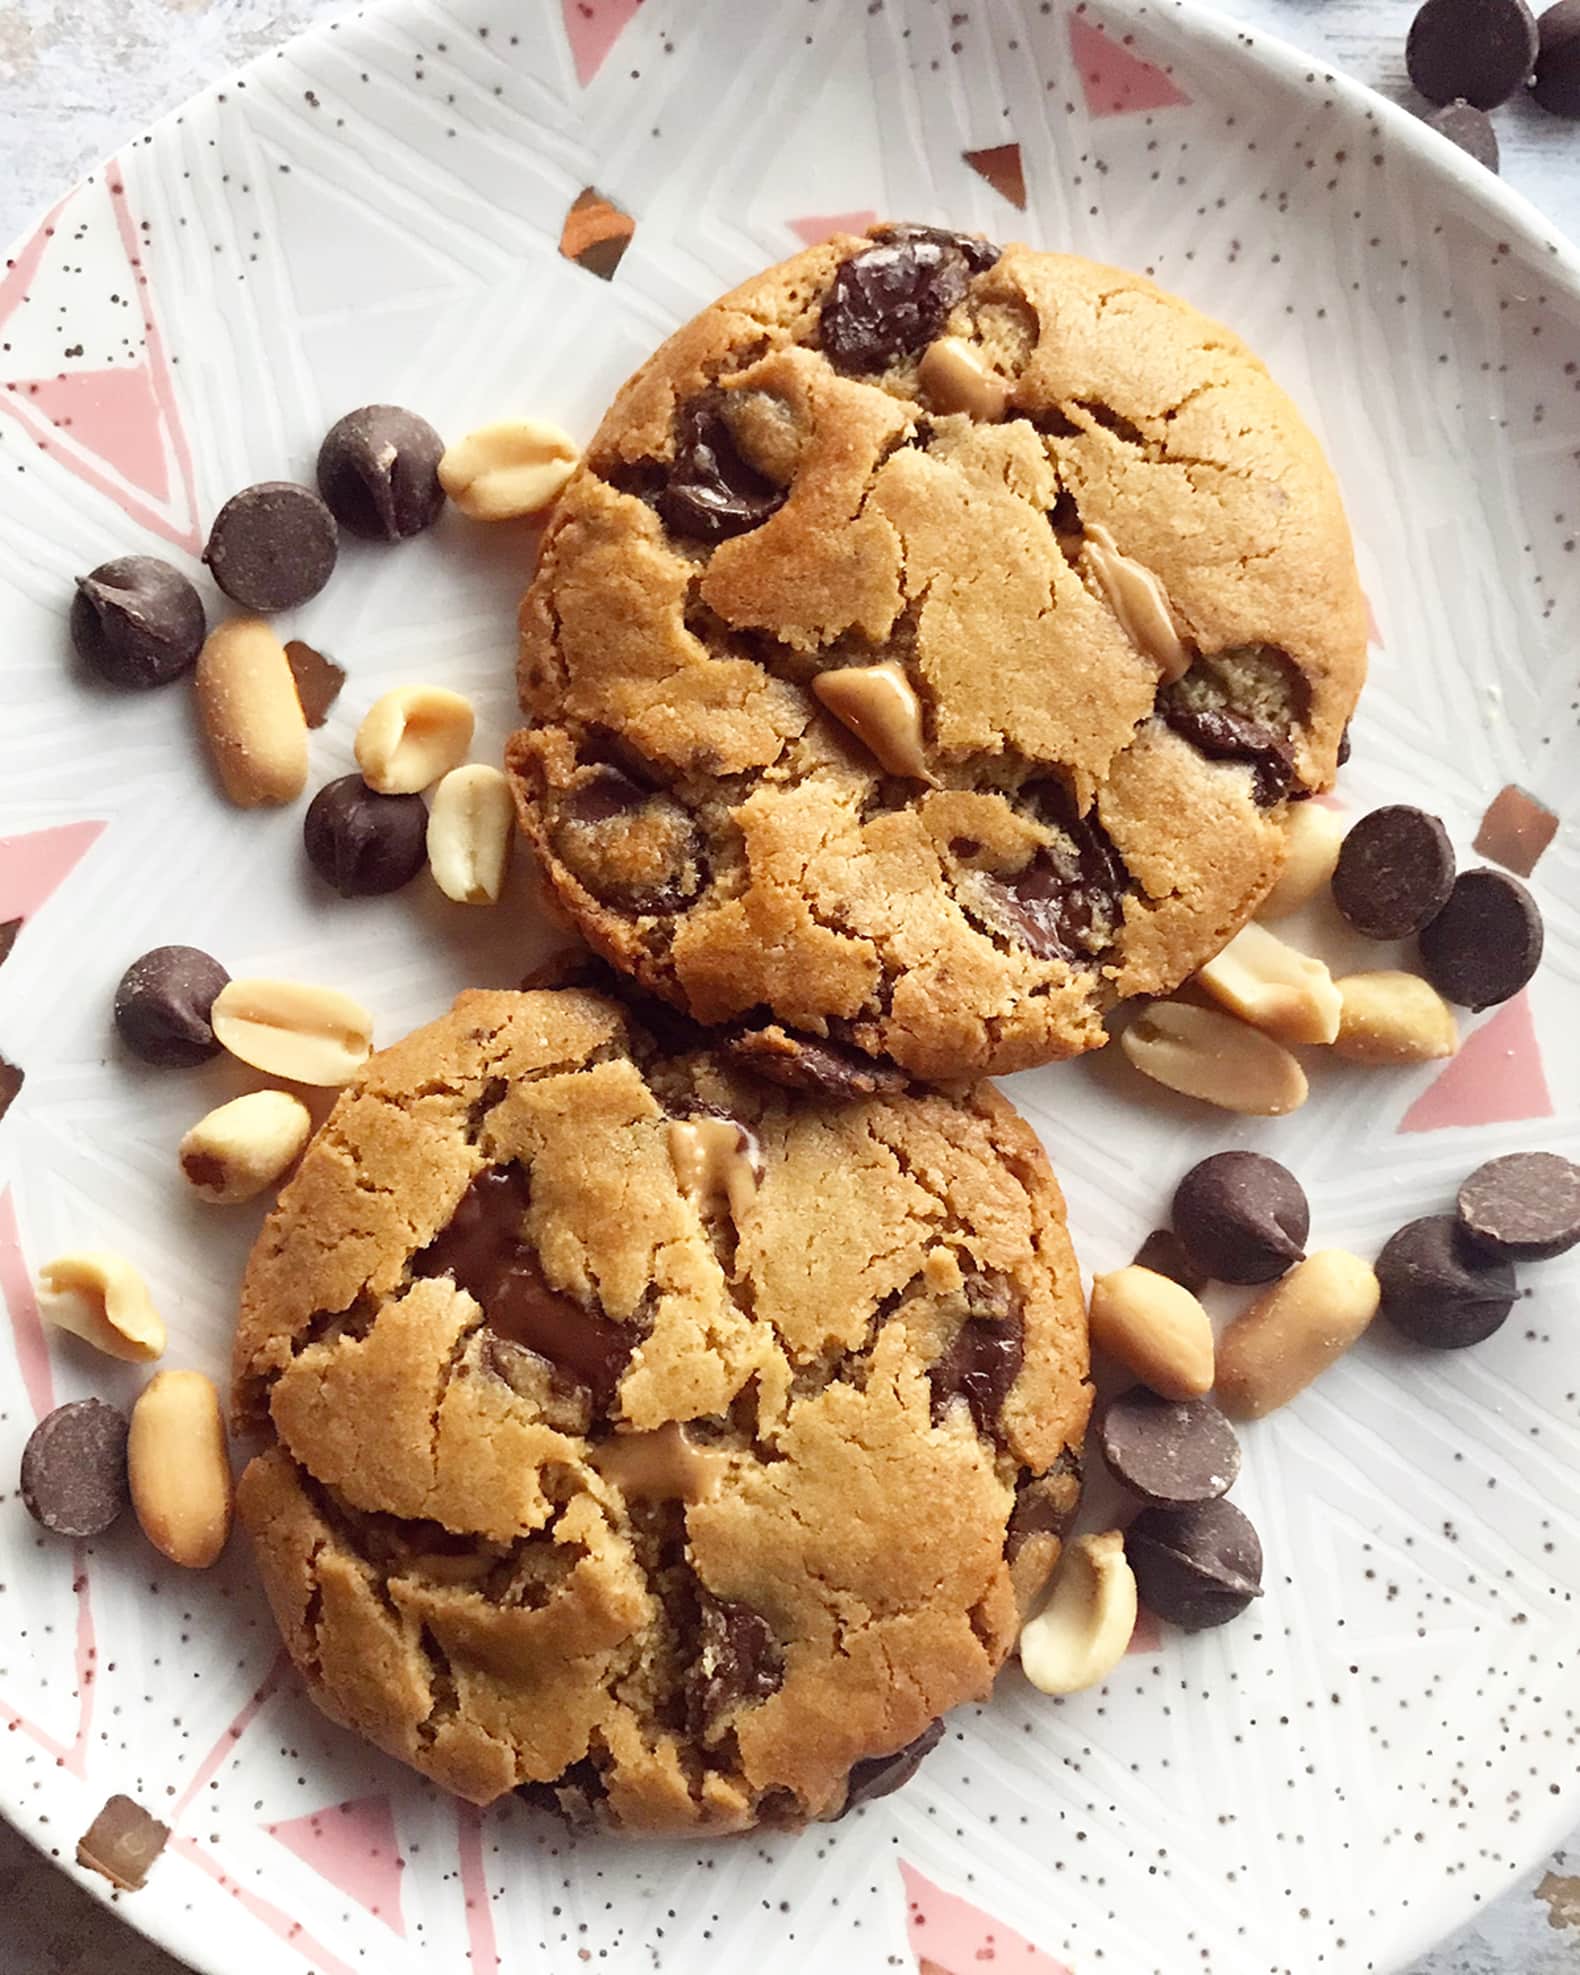 The Naughty Cookie Vegan Peanut Butter Chocolate Chip Cookies